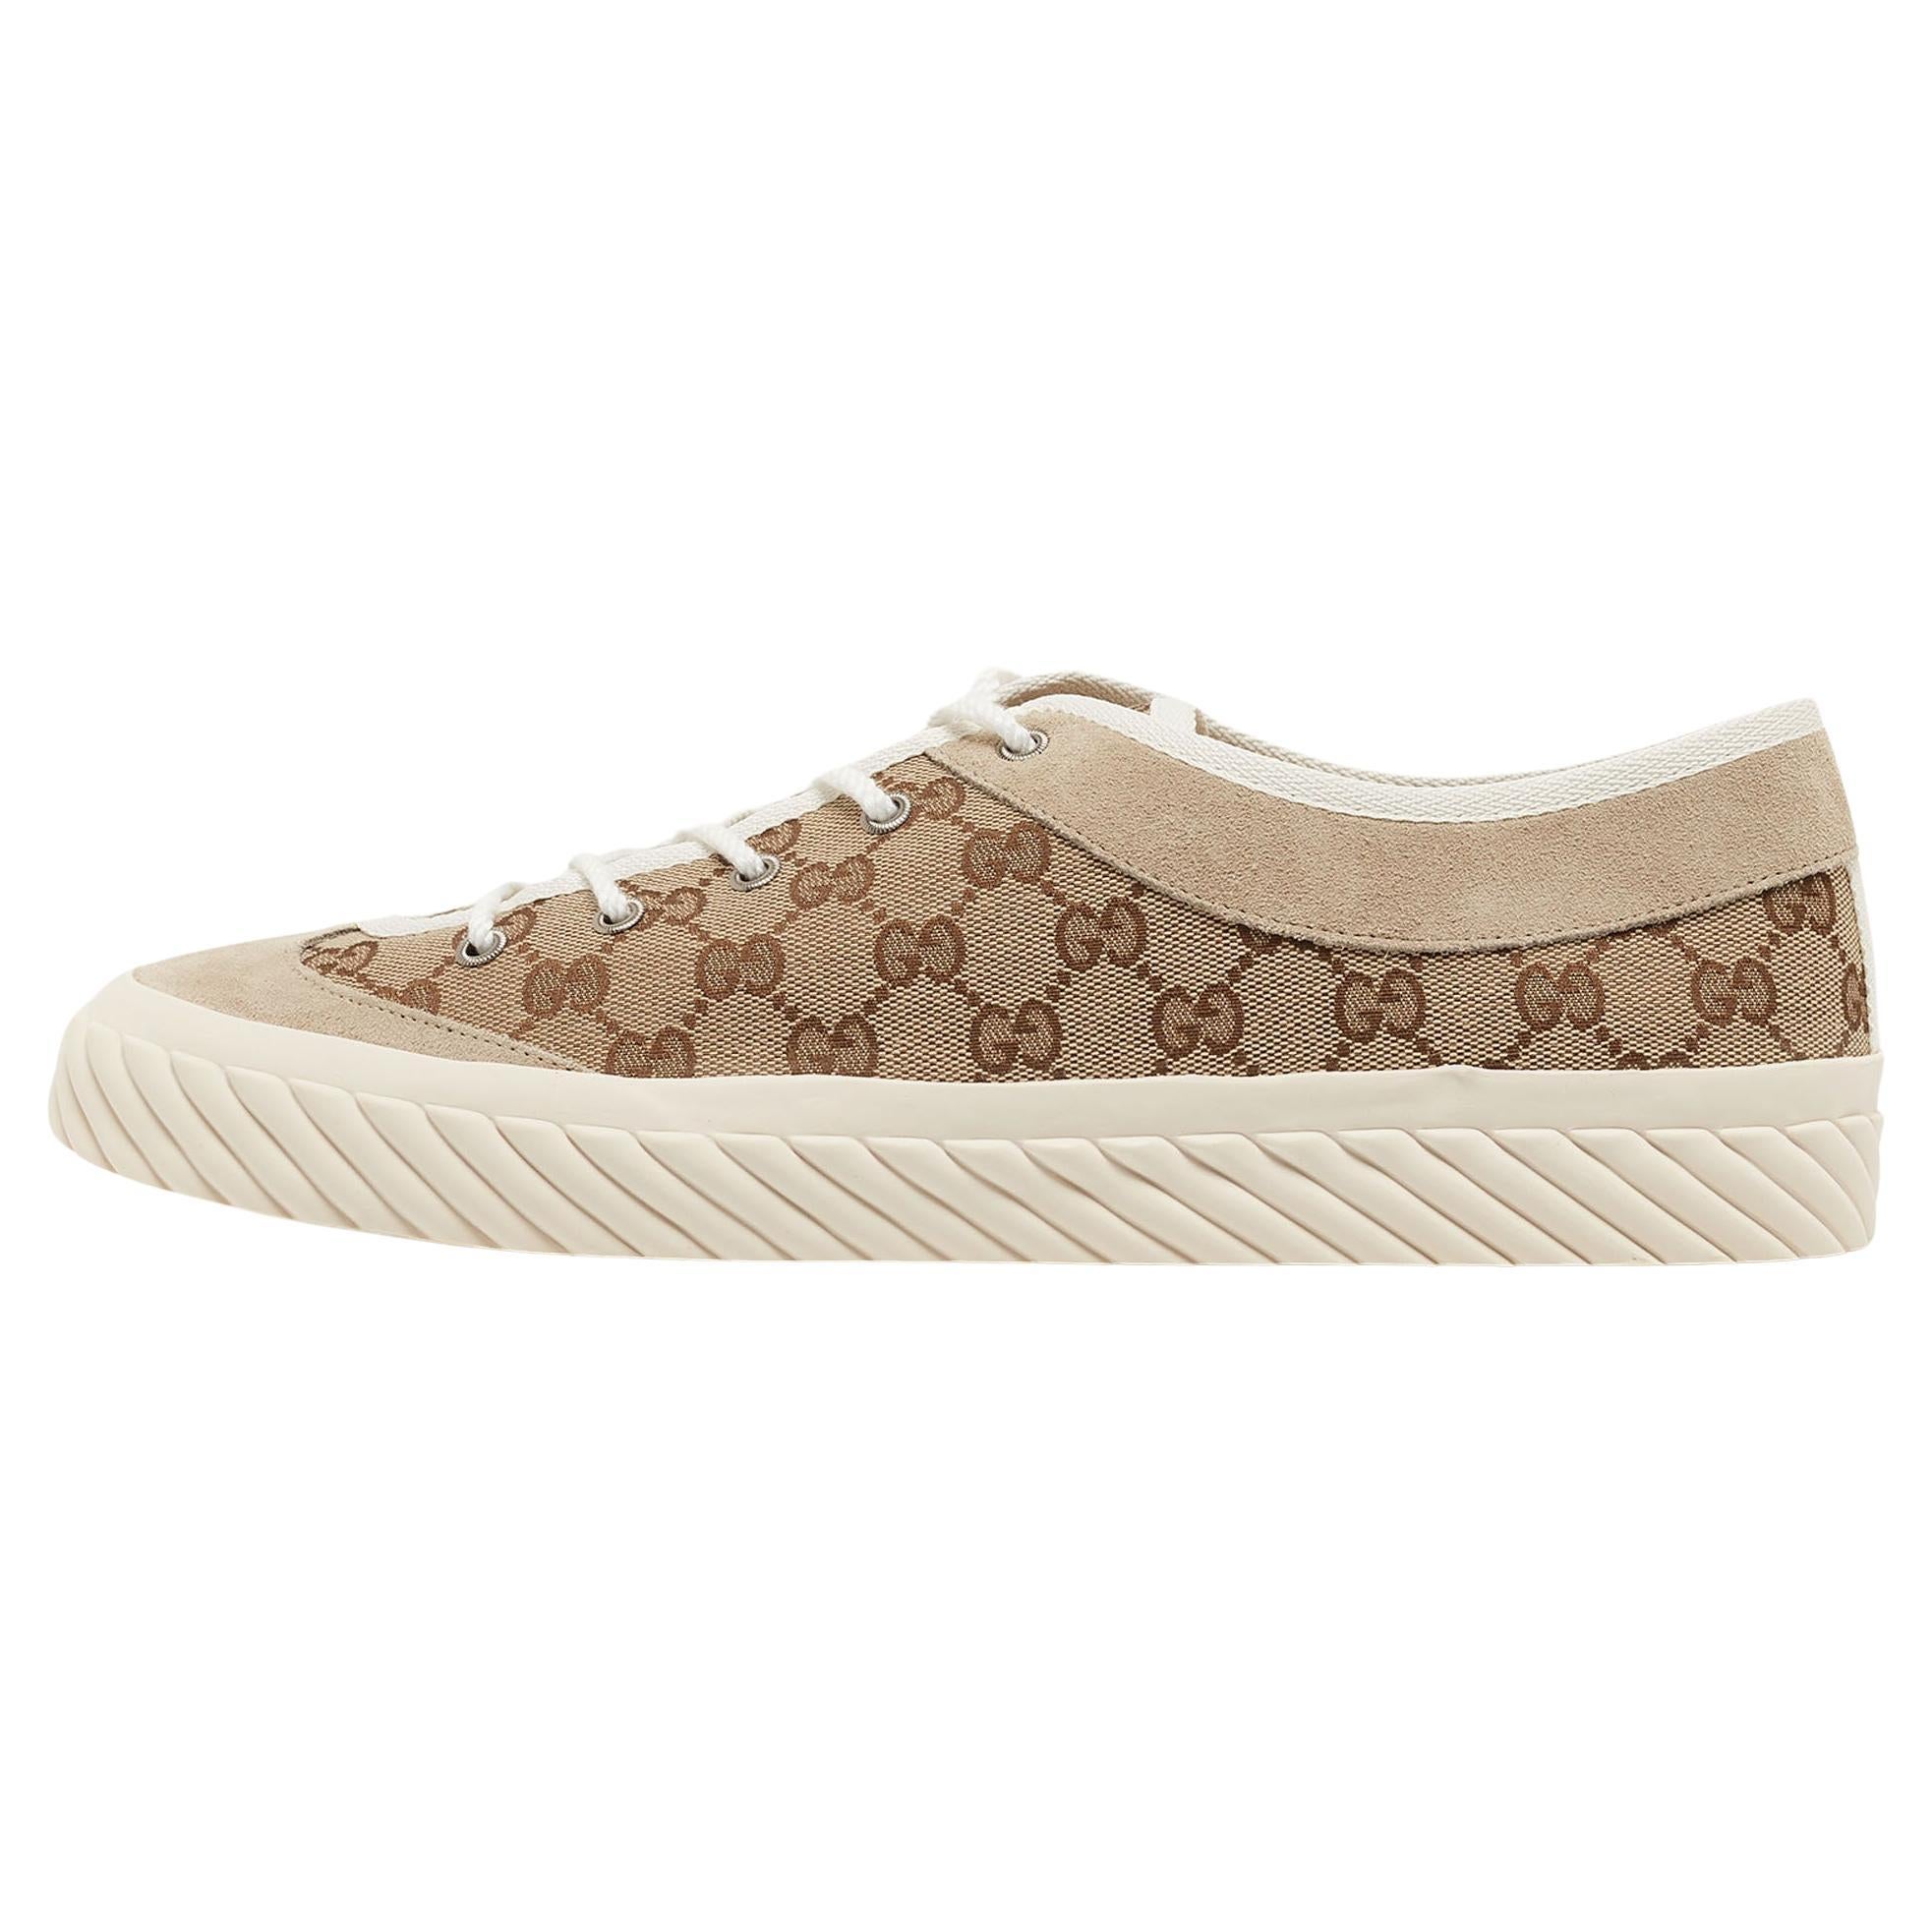 Gucci Beige Canvas and Suede Low Top Sneakers Size 46 For Sale